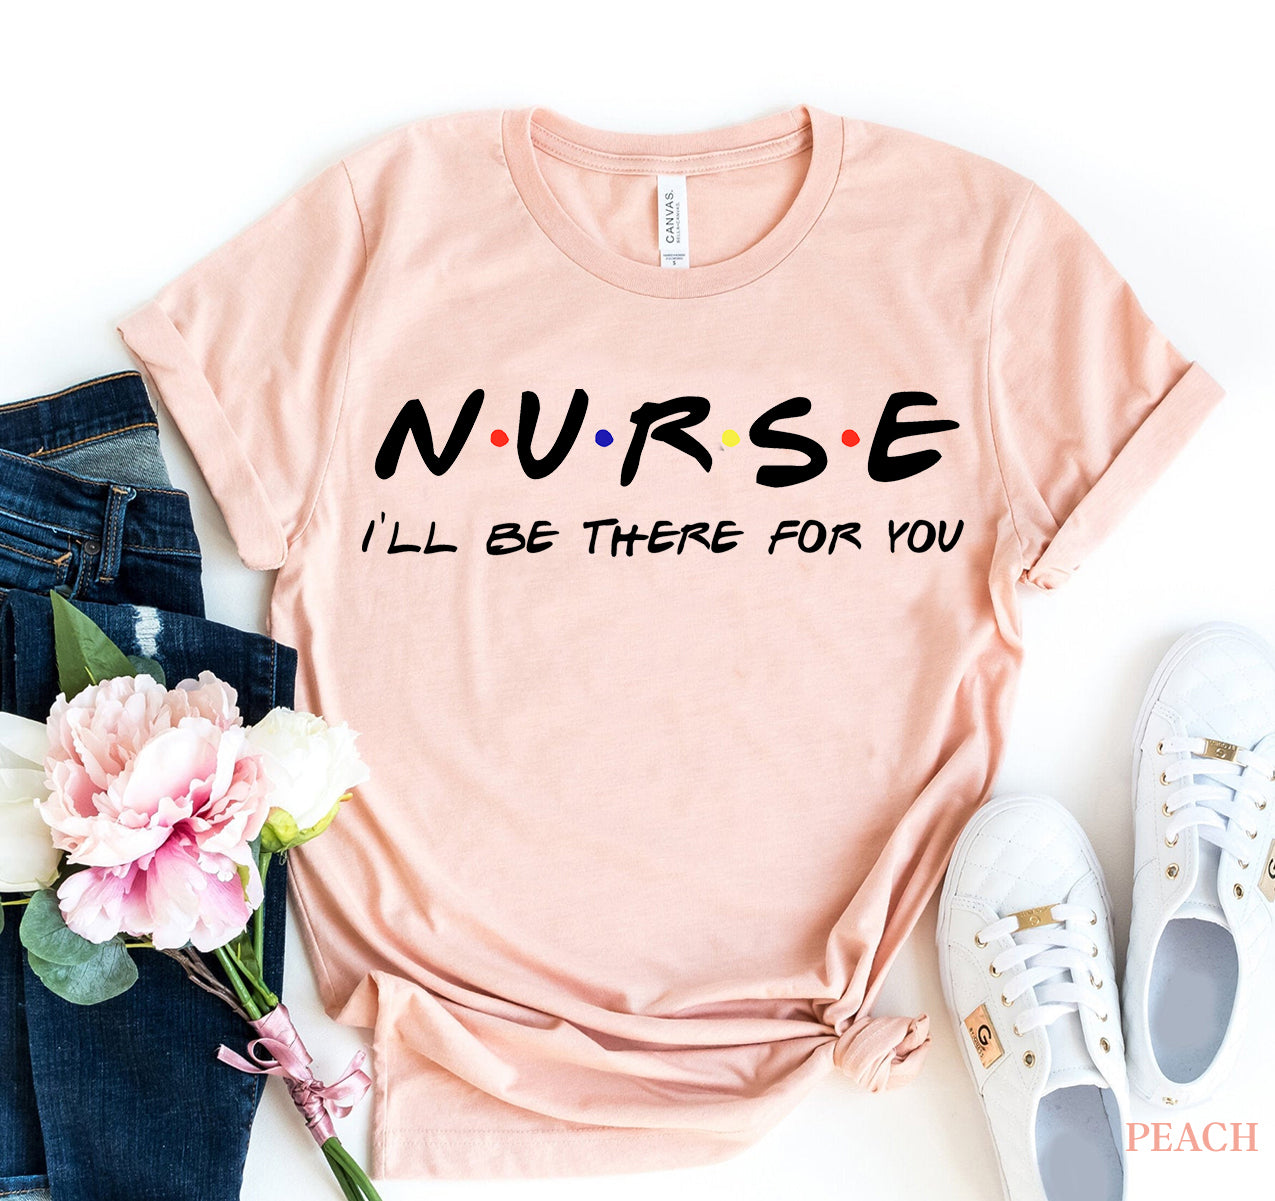 Nurse - I'll be there for you T-shirt